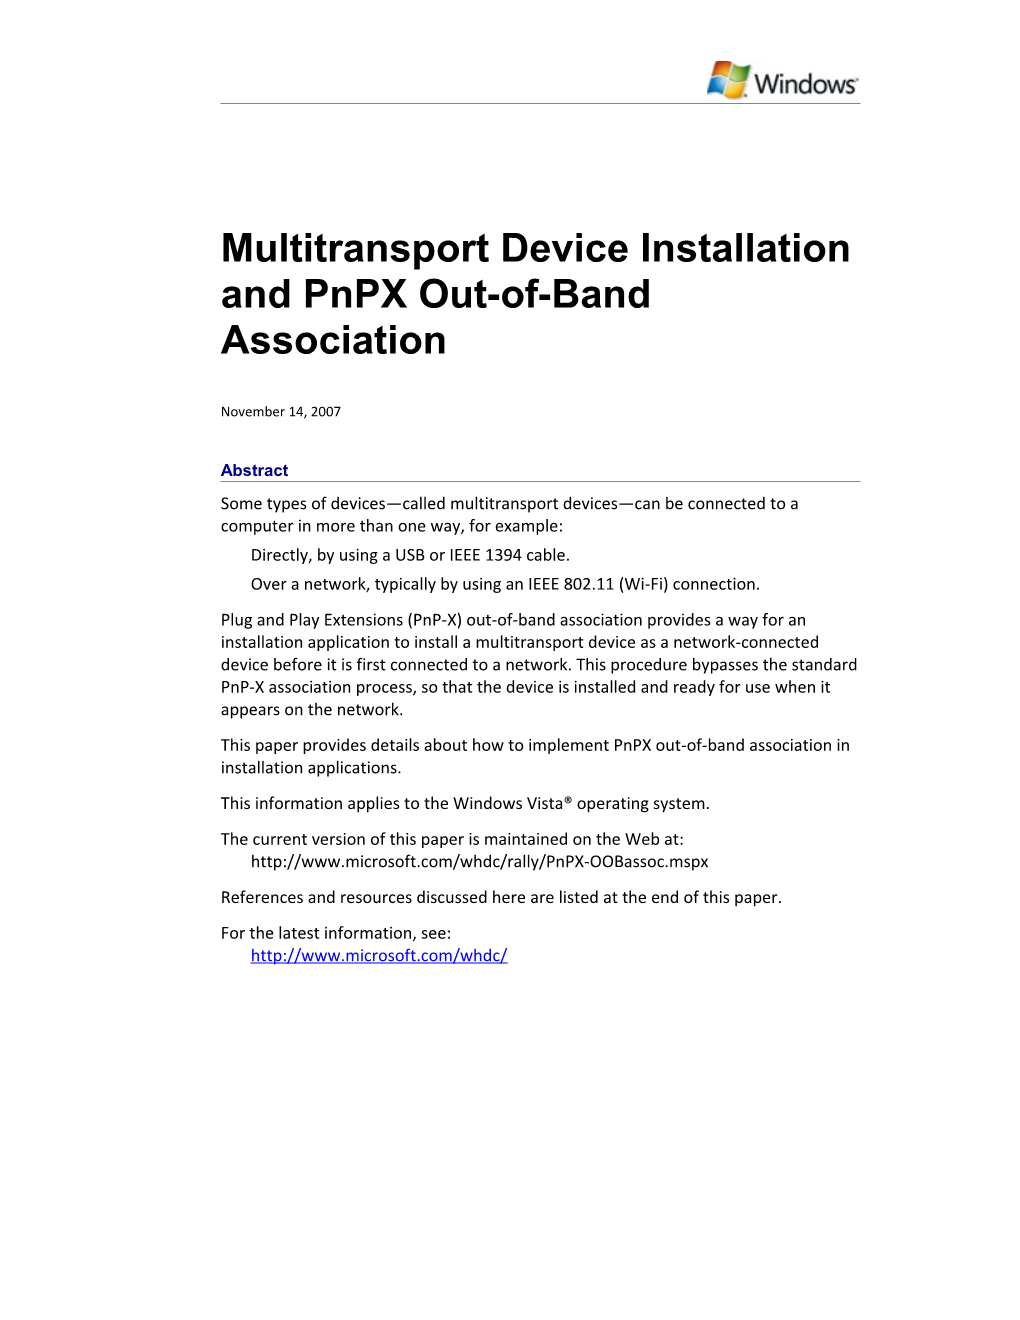 Multitransport Device Installation and Pnp X Out-Of-Band Association